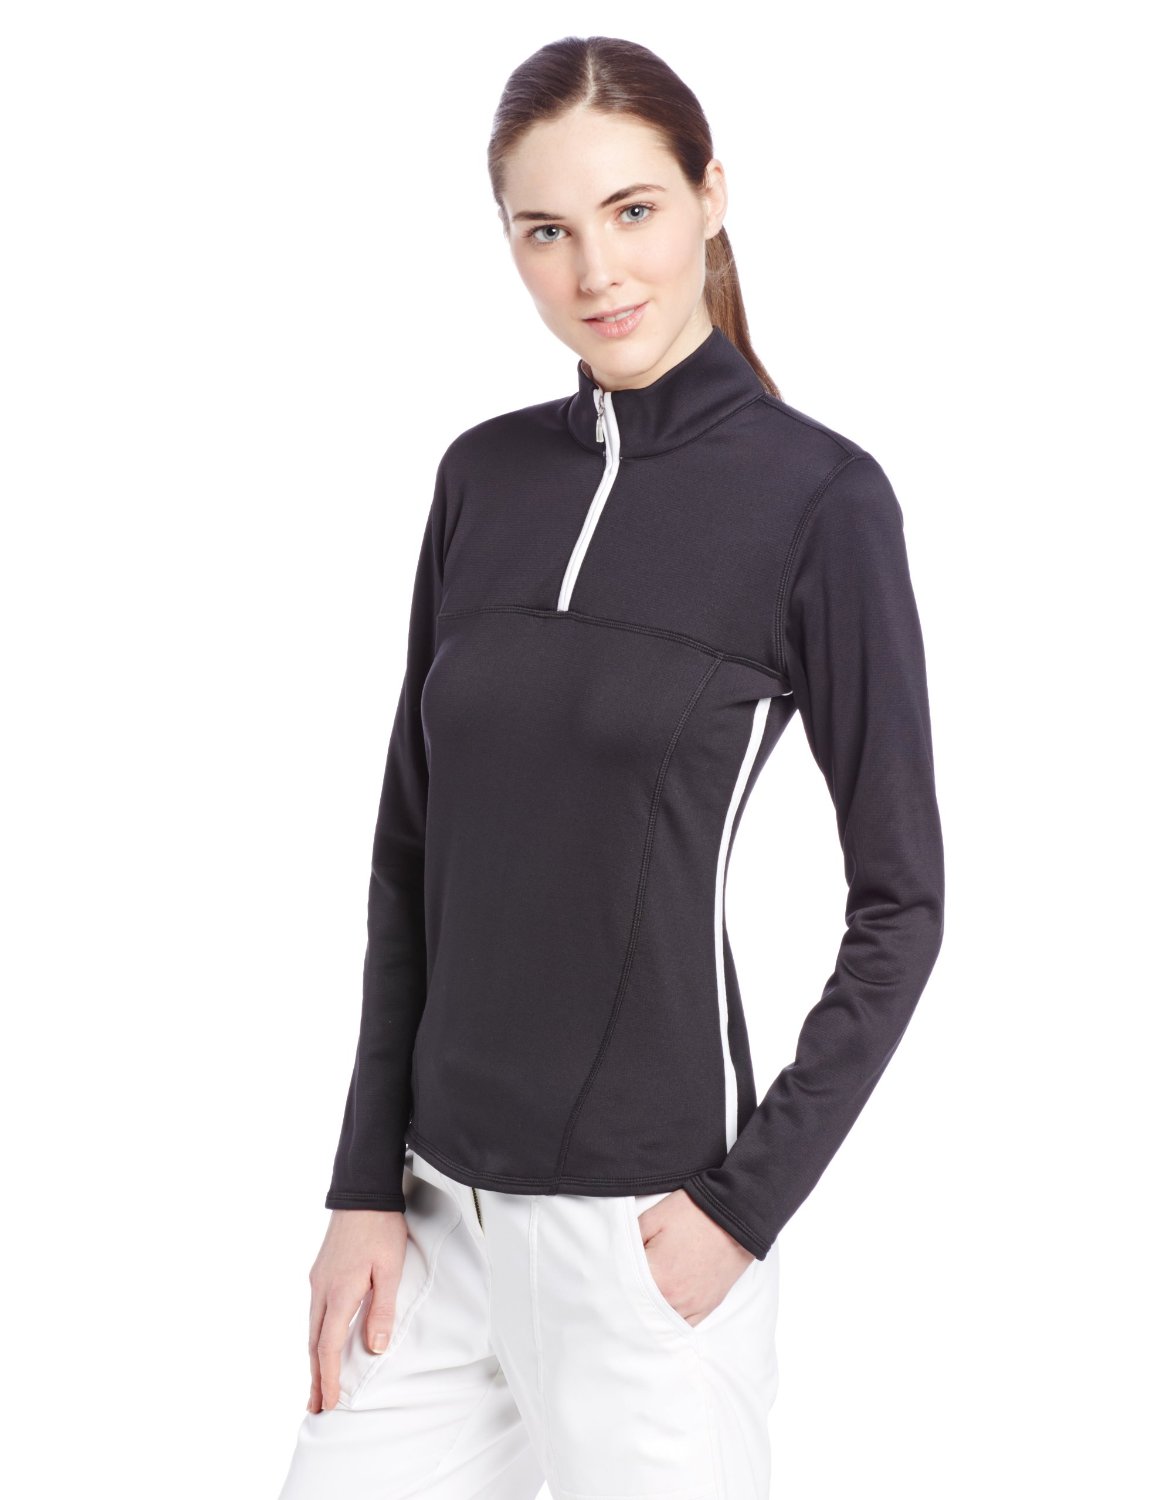 Adidas Womens Climawarm Plus Golf Pullovers